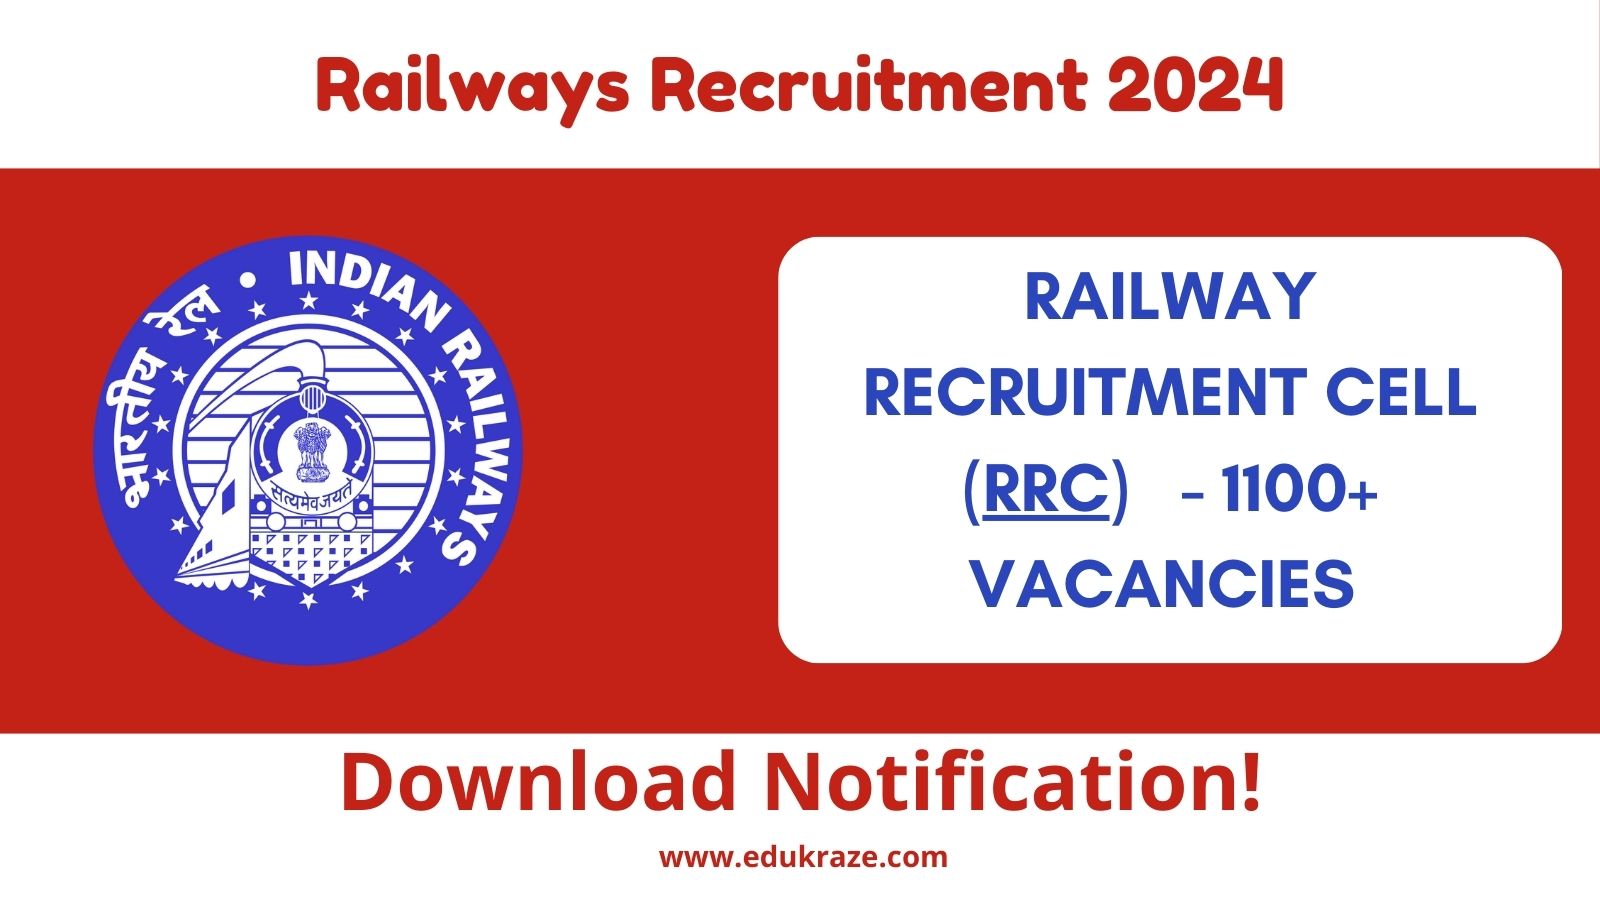 Railway Recruitment Cell Vacancies out For 1100+ Posts, Check Notification Here!